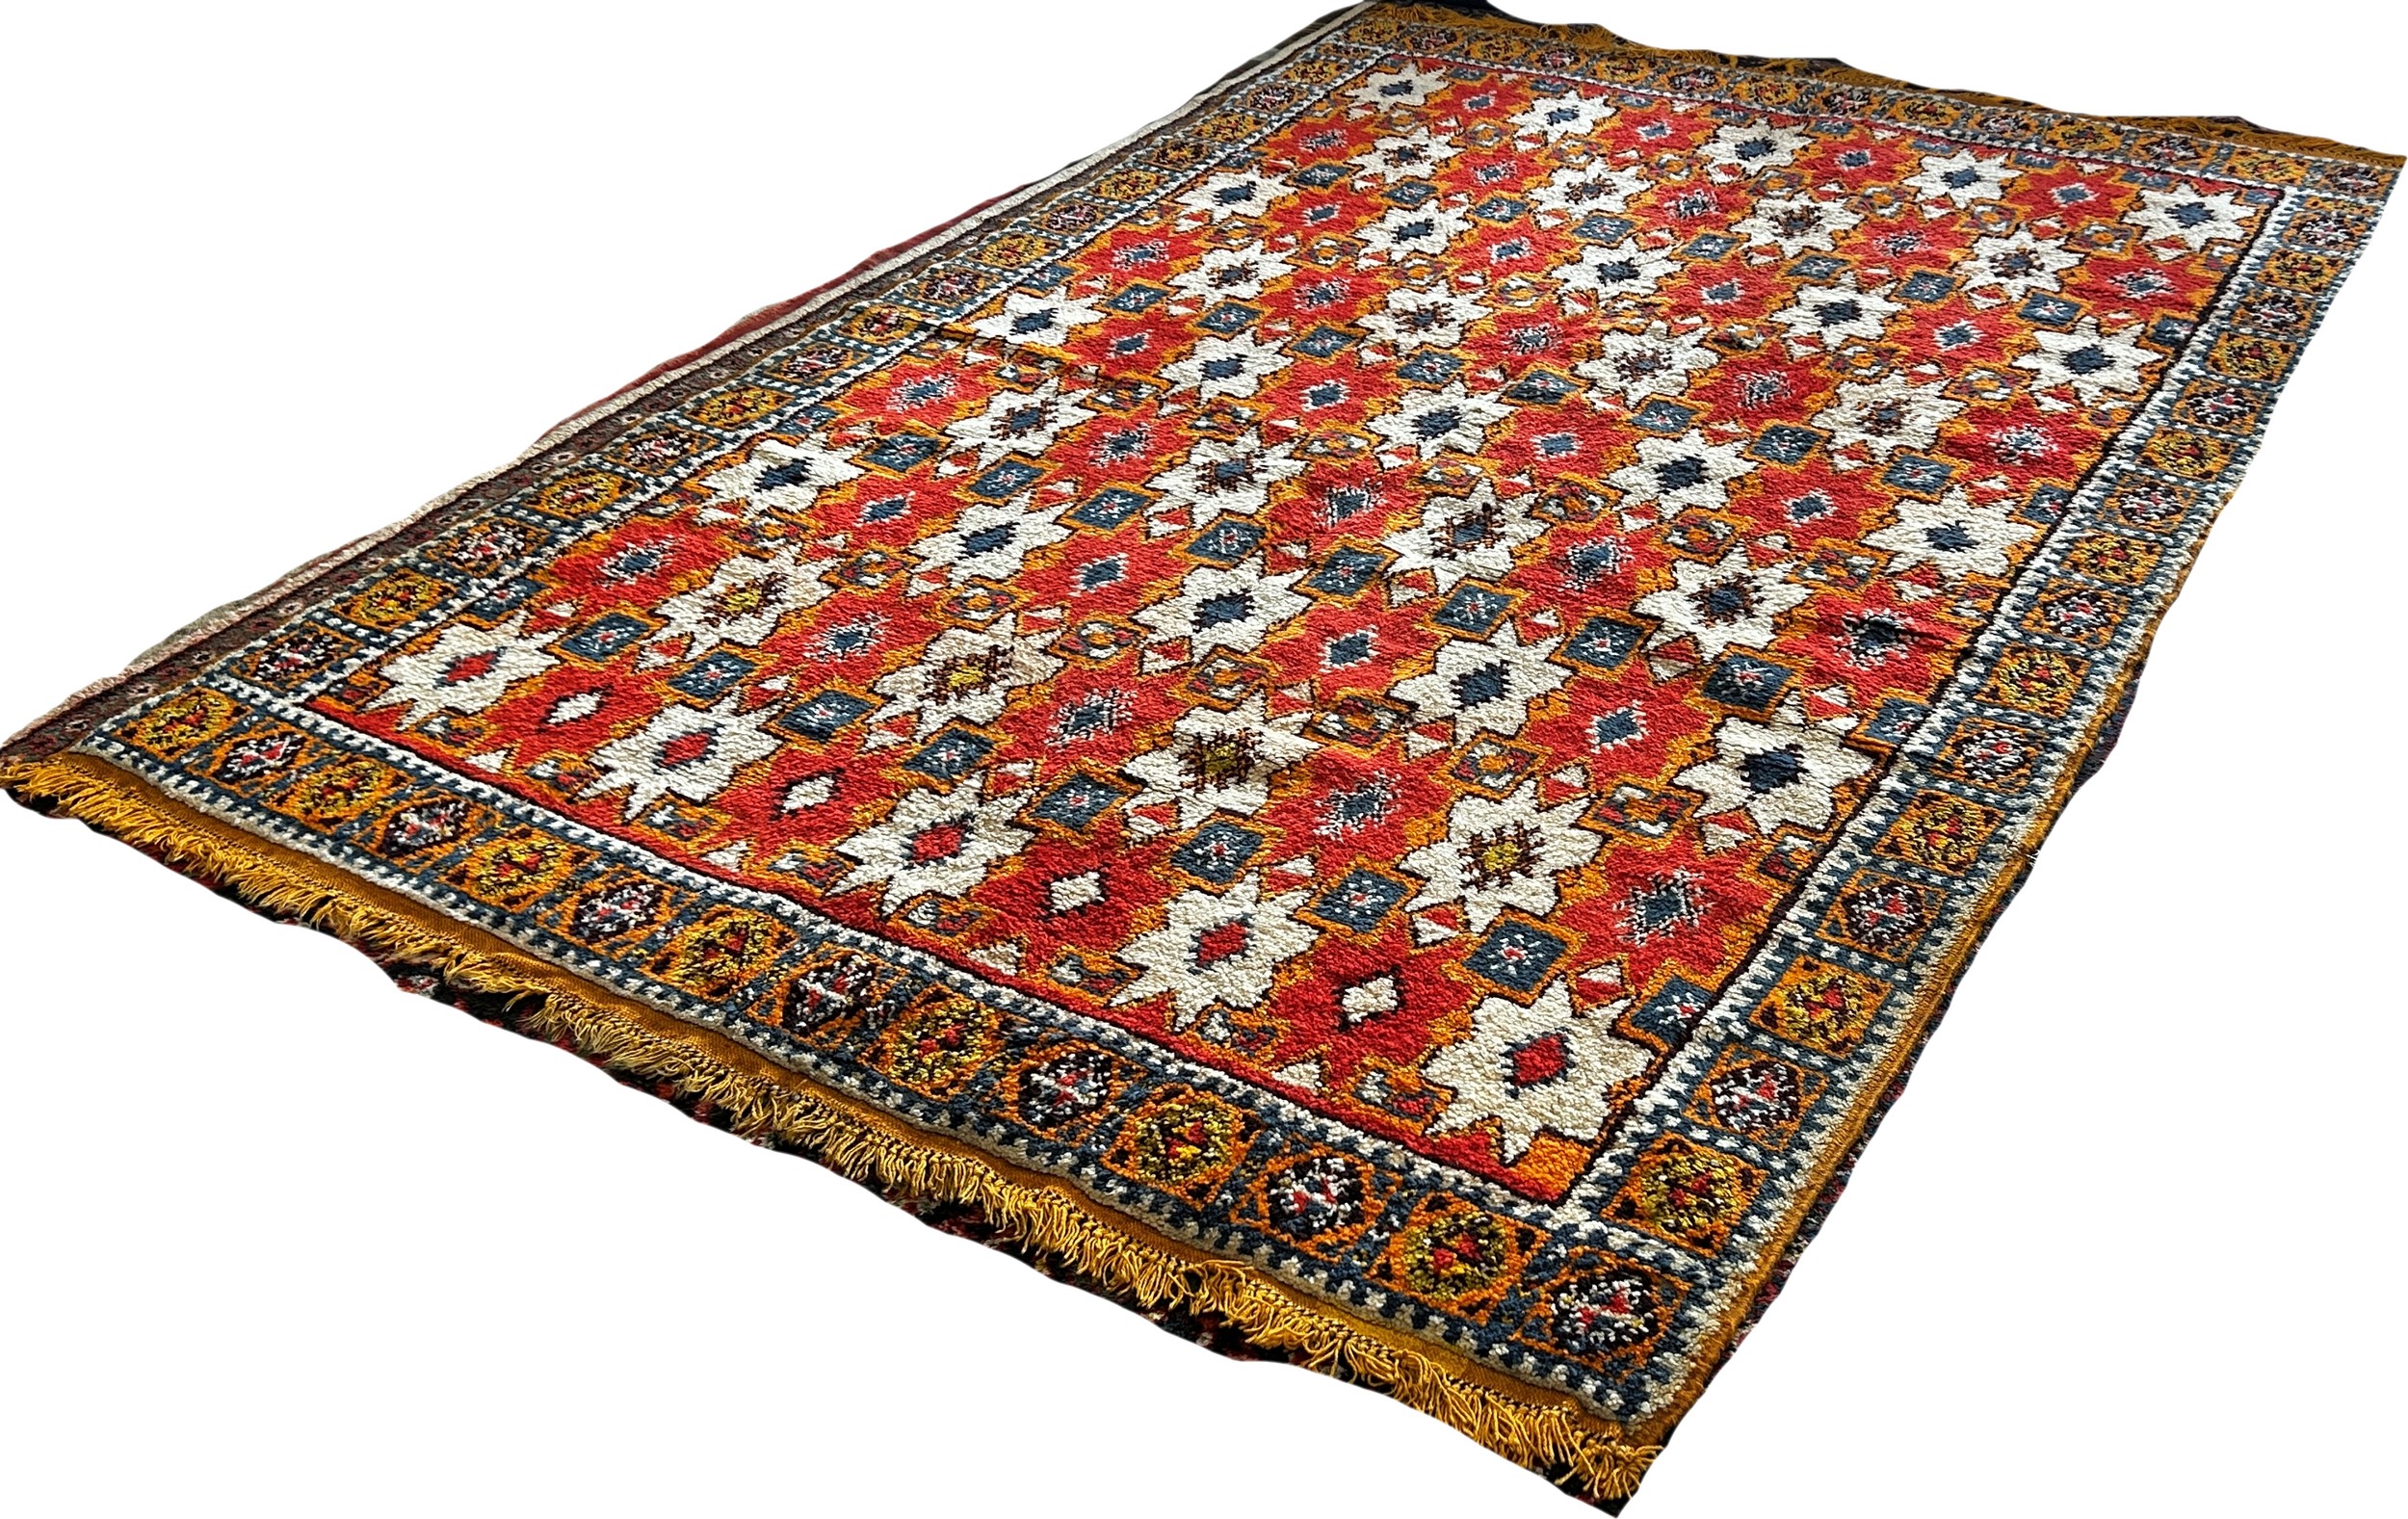 A Moroccan wool carpet with cream stars on a predominantly orange ground, 280 x 190cm approximately. - Image 2 of 3